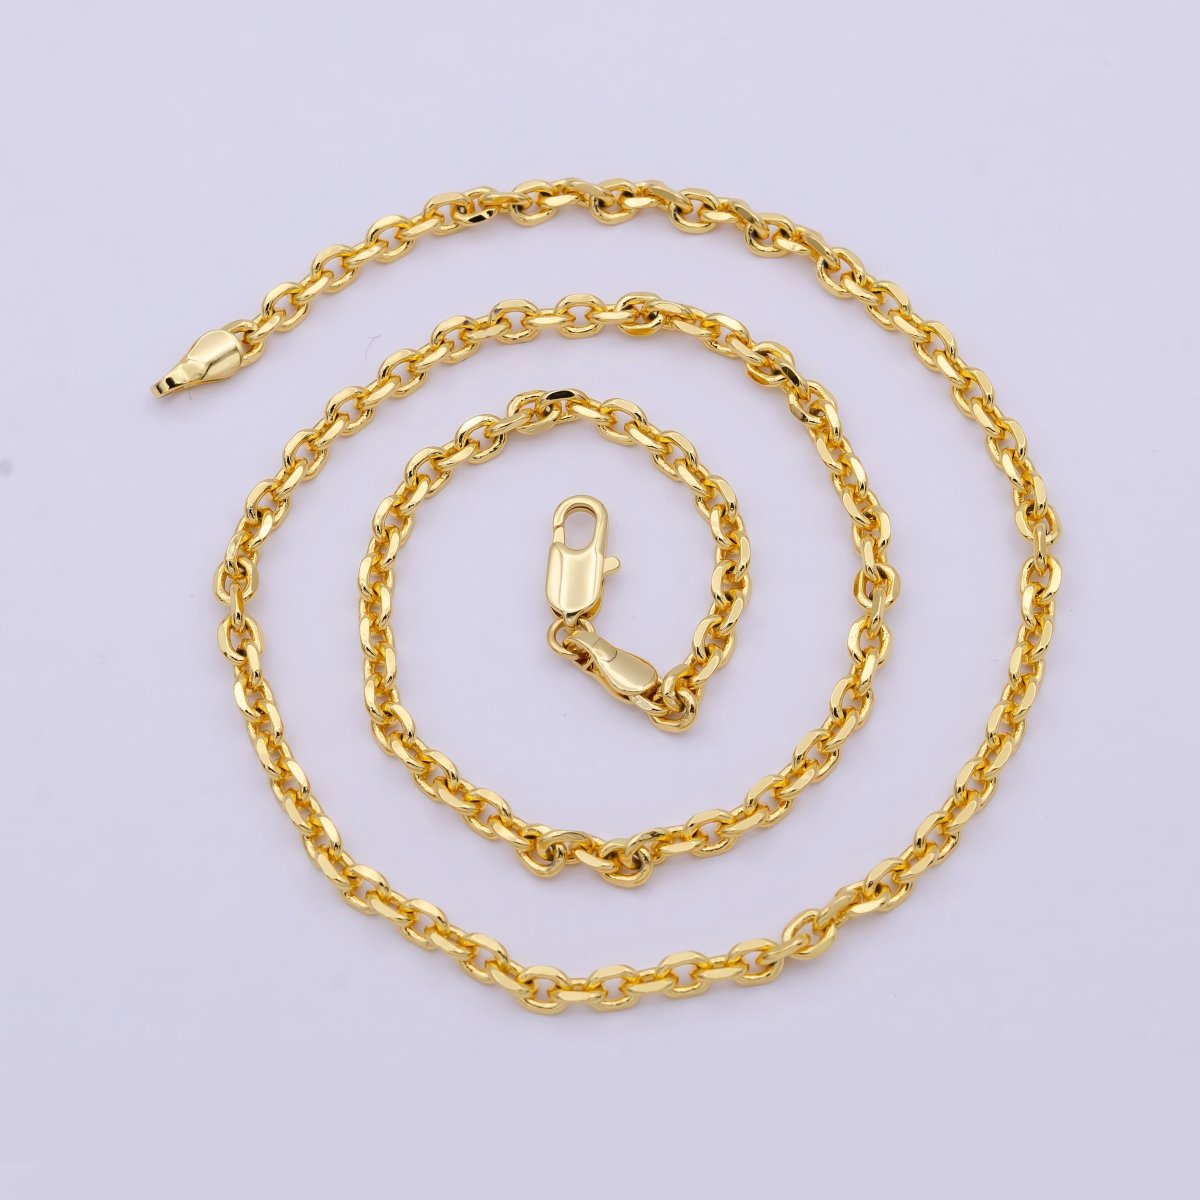 3.26 mm Cable Chain | Gold Filled Cable Necklace | Unisex Men Woman Necklace 17.7 inch | WA-796 Clearance Pricing - DLUXCA